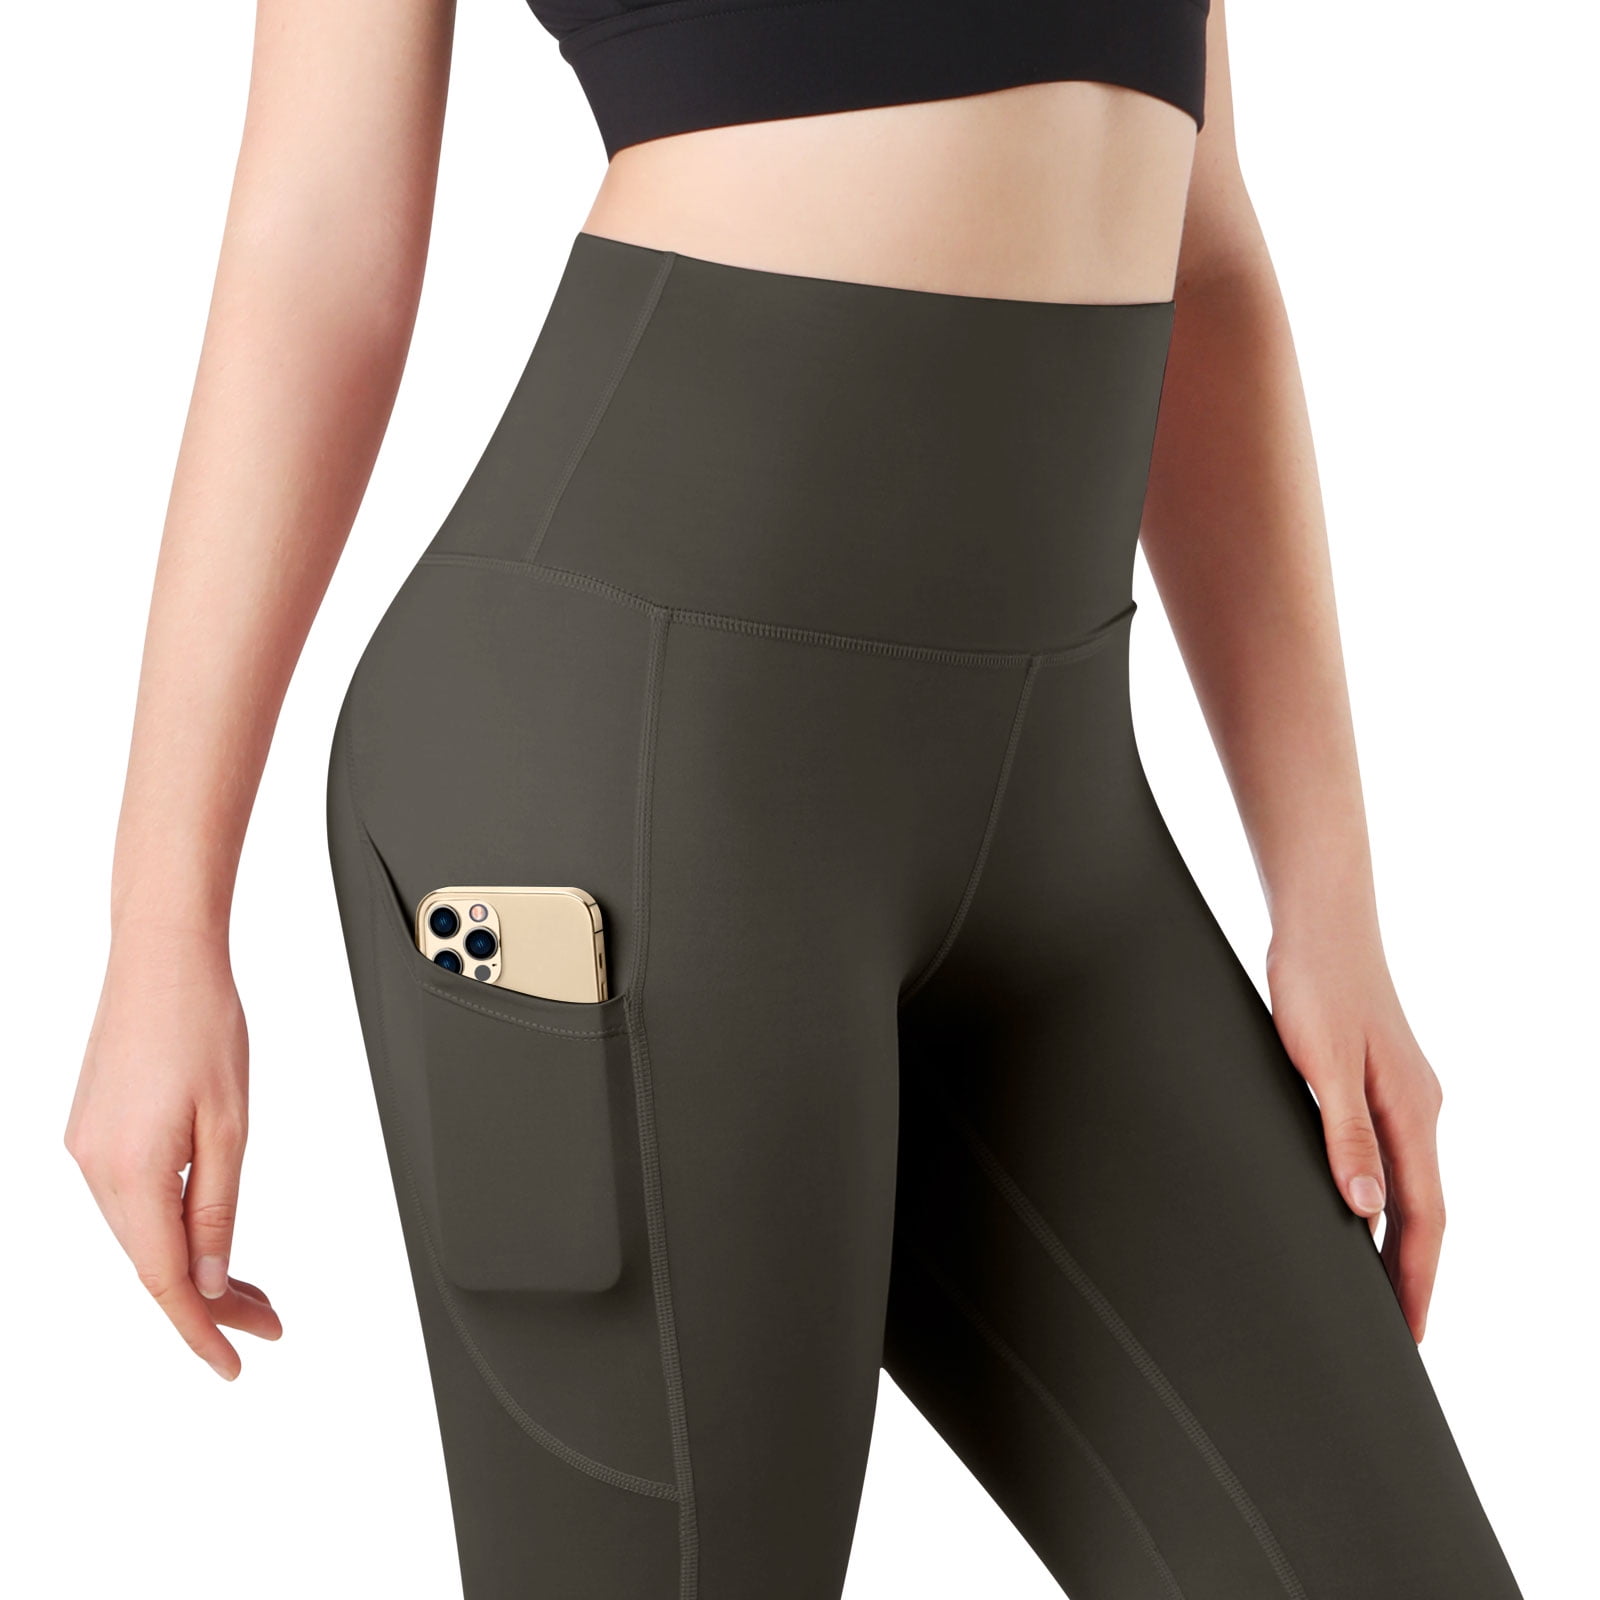 Breathable Active Yoga High Waisted Compression Leggings With Tummy Control  And Compression For Womens Workout From Hollywany, $12.81